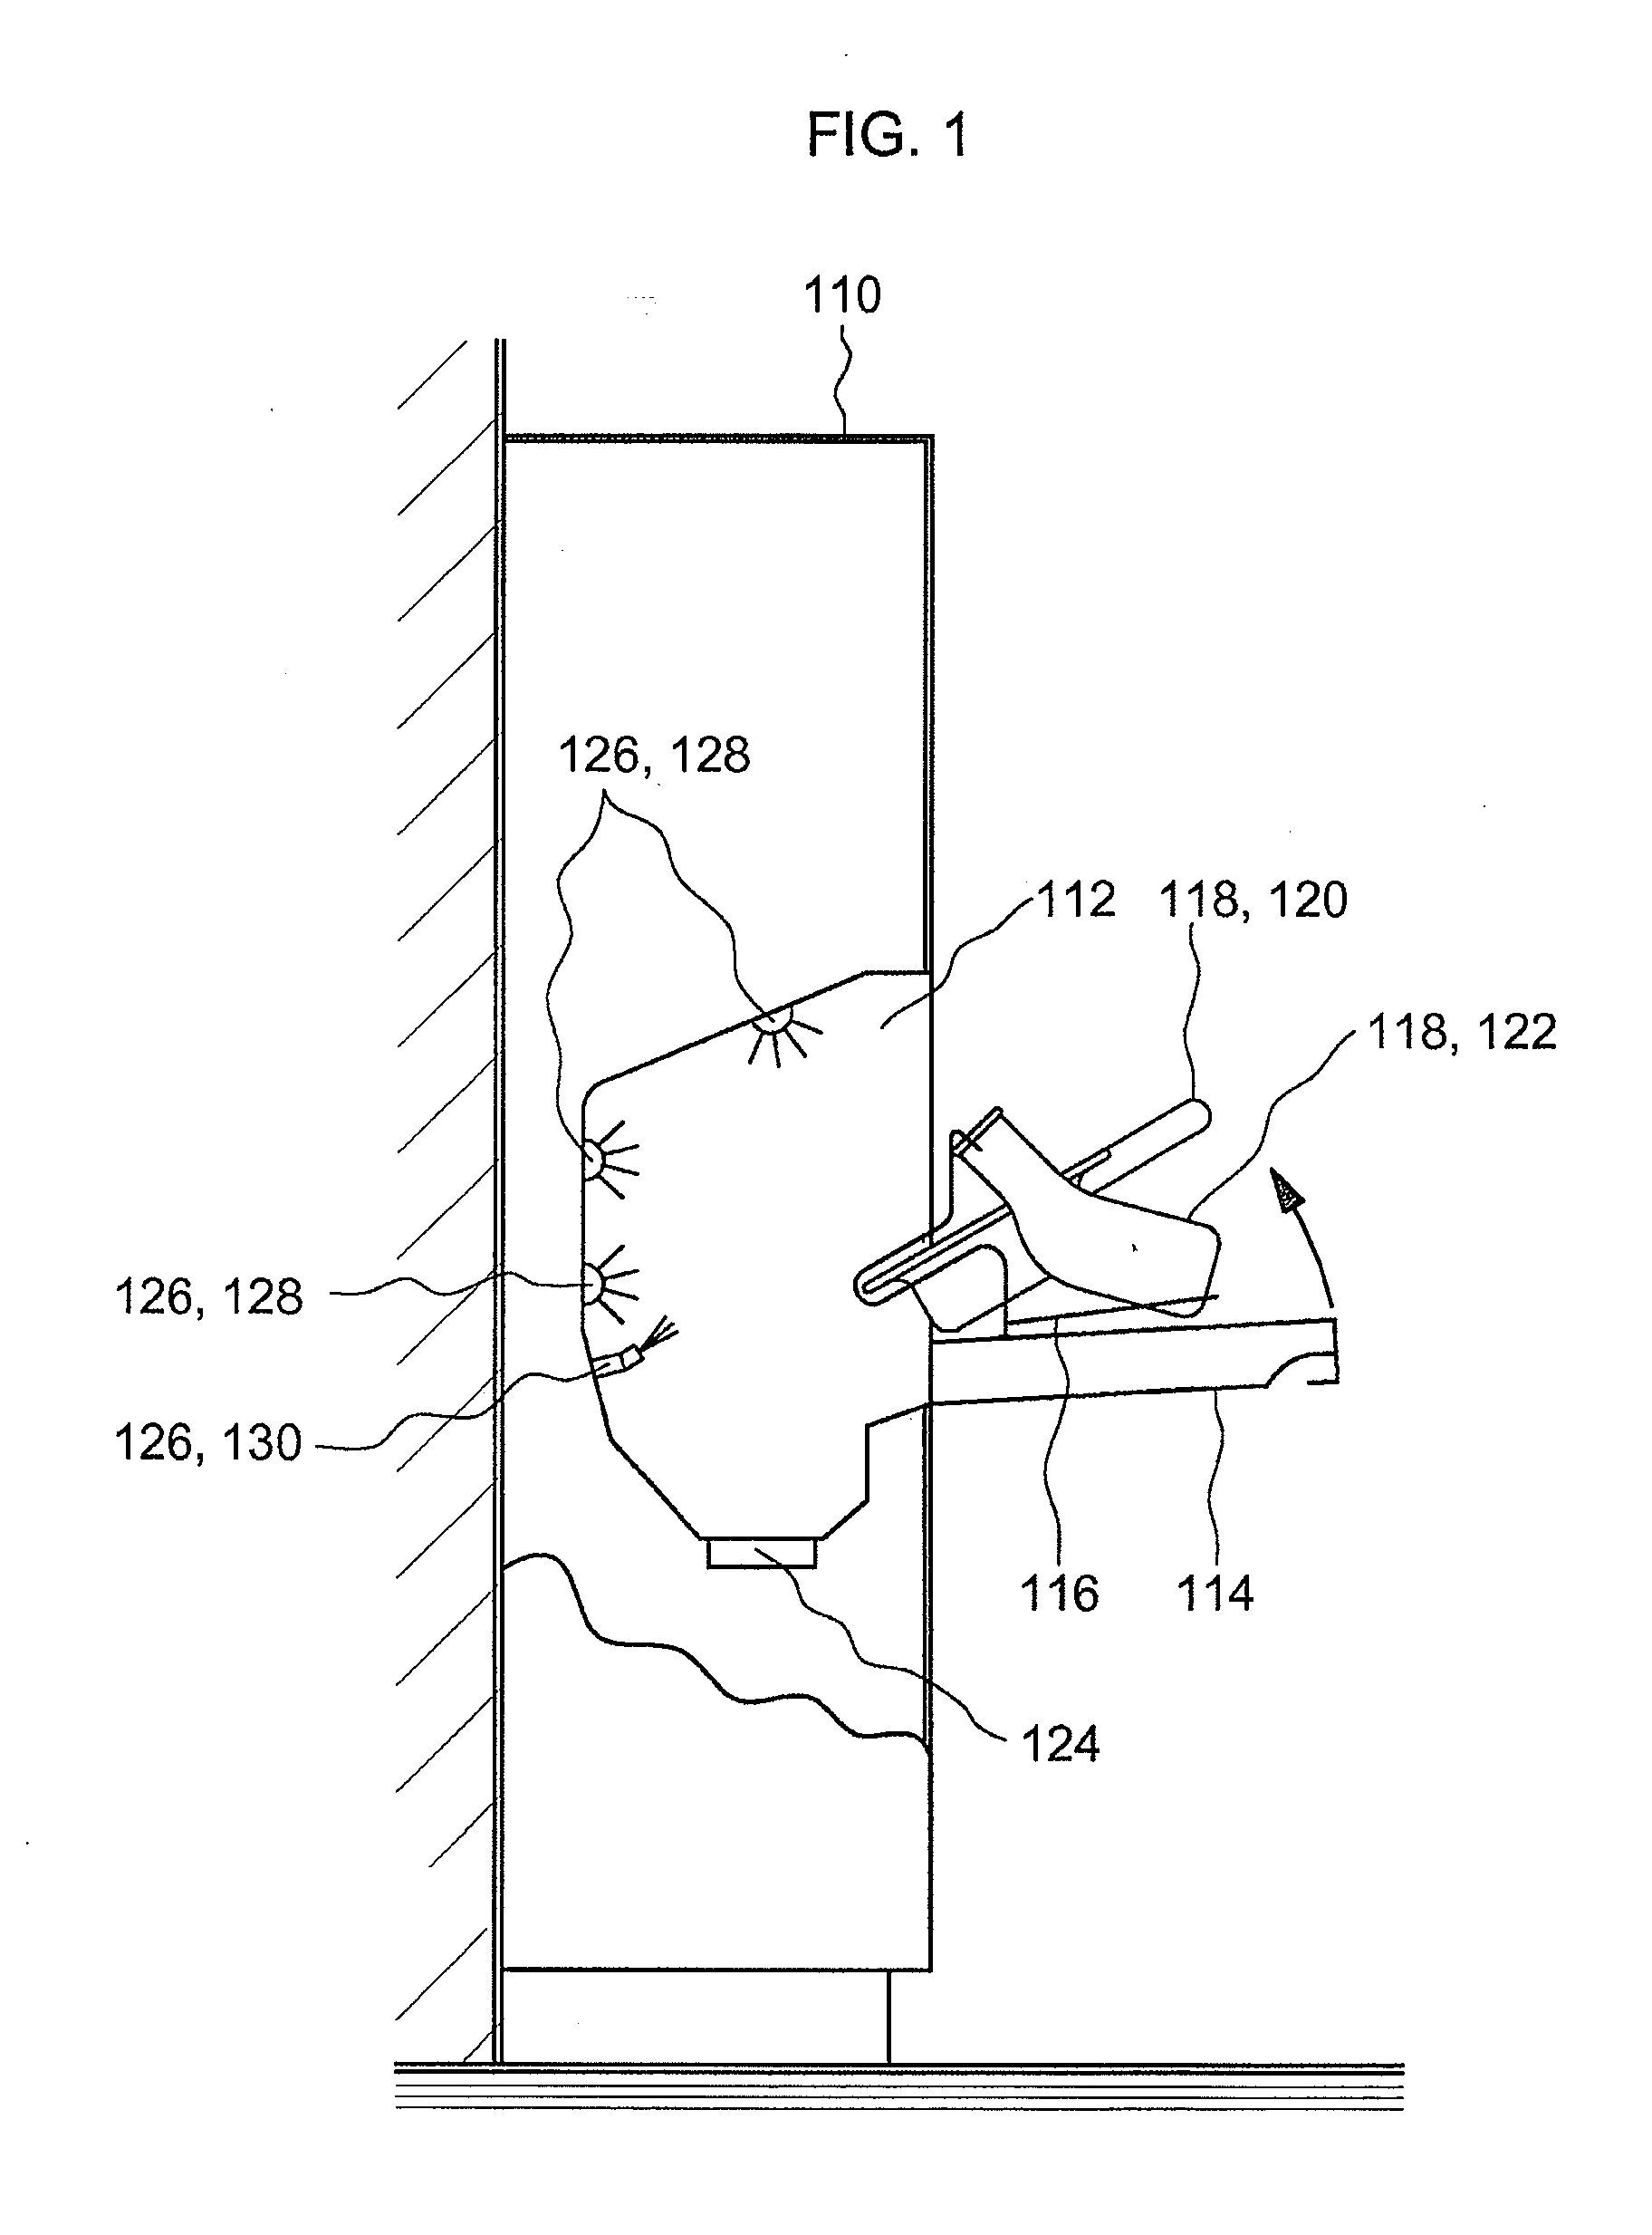 Cleaning and disinfecting instrument with adjustable nozzle